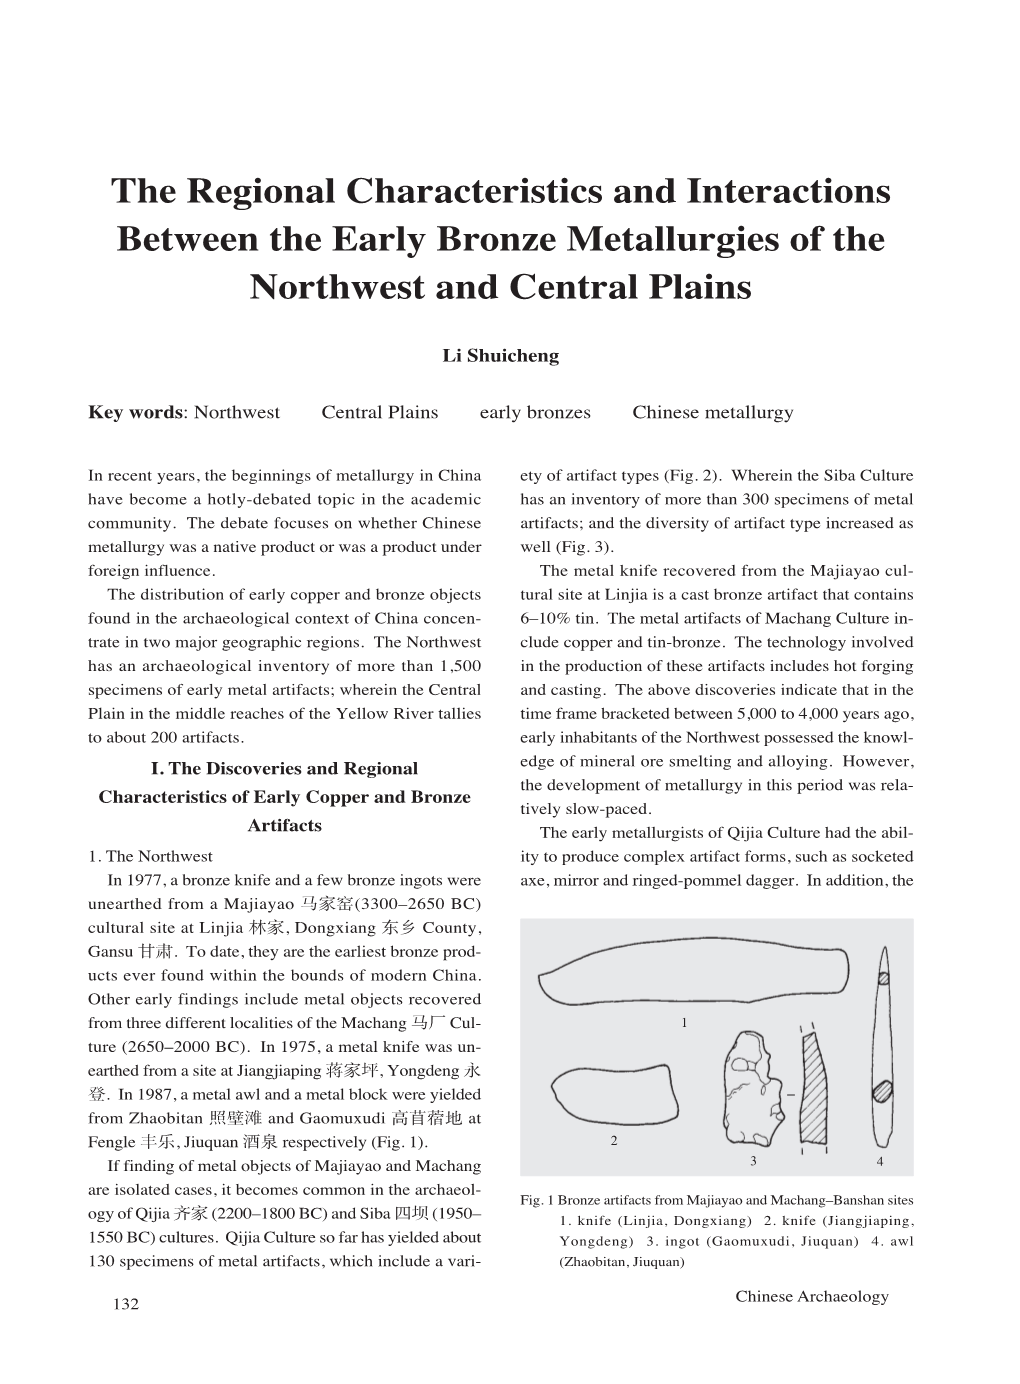 The Regional Characteristics and Interactions Between the Early Bronze Metallurgies of the Northwest and Central Plains